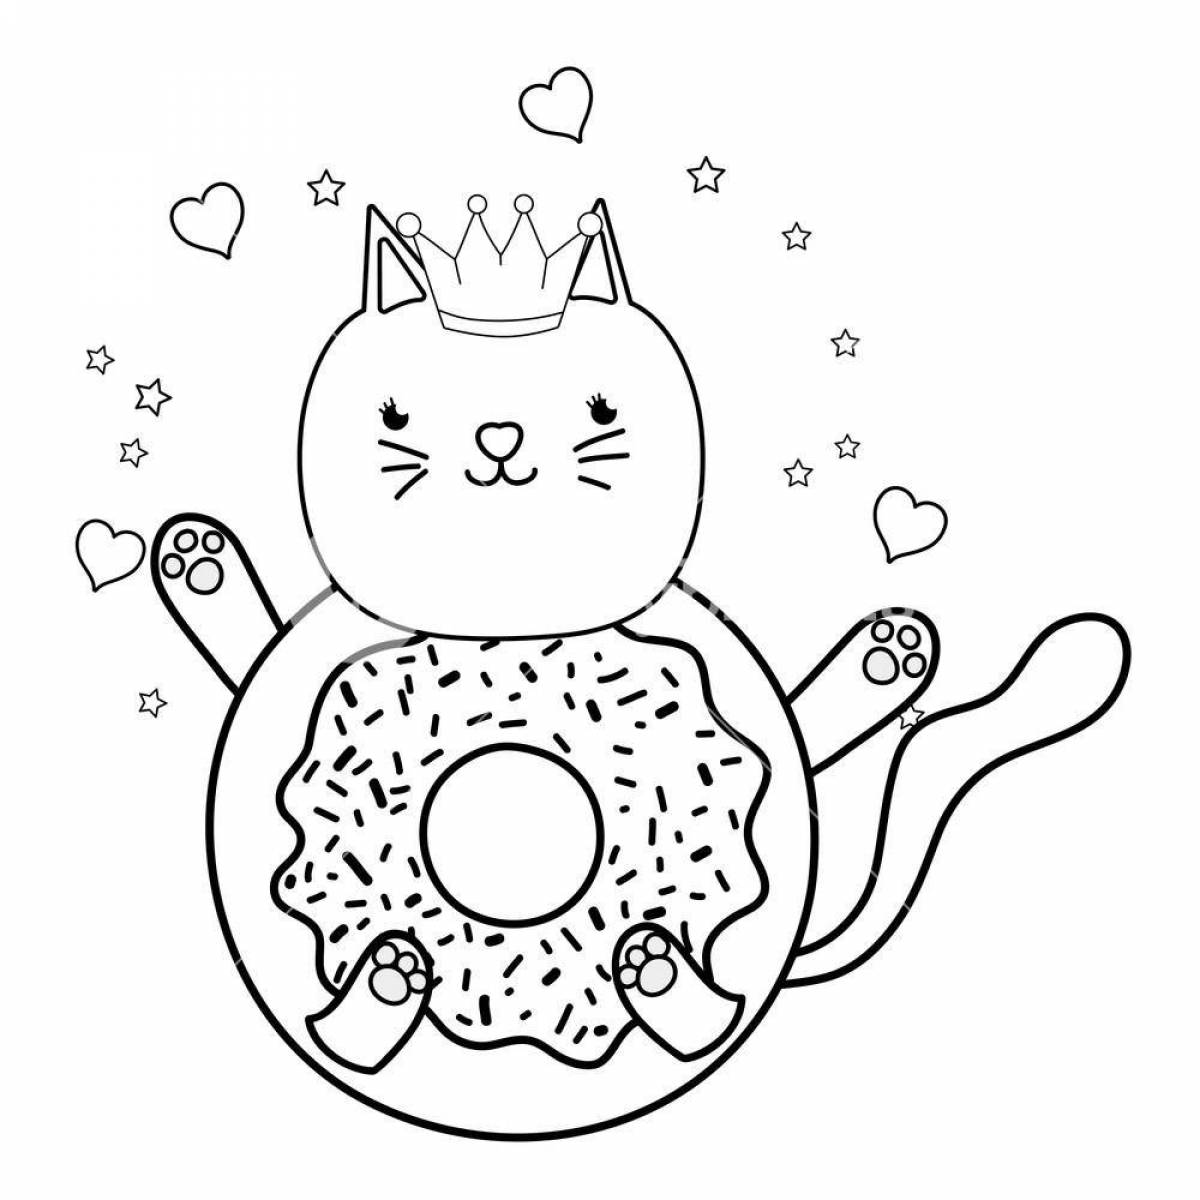 Fantastic donut cat coloring page